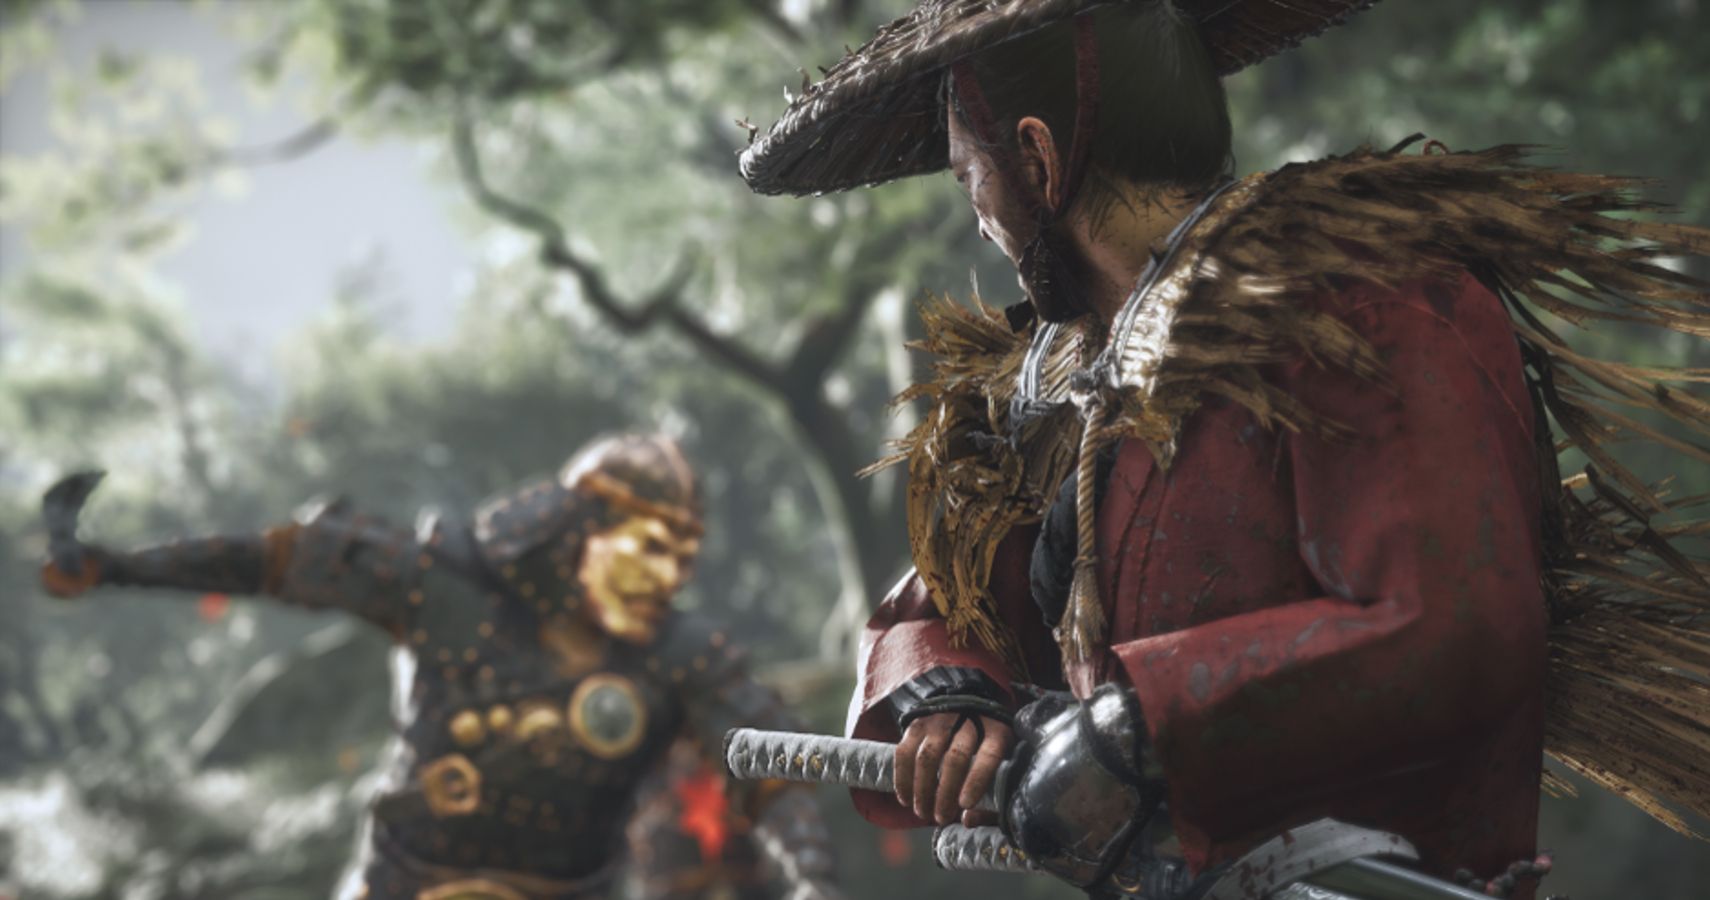 Ghost of Tsushima Creative Director says combat is very